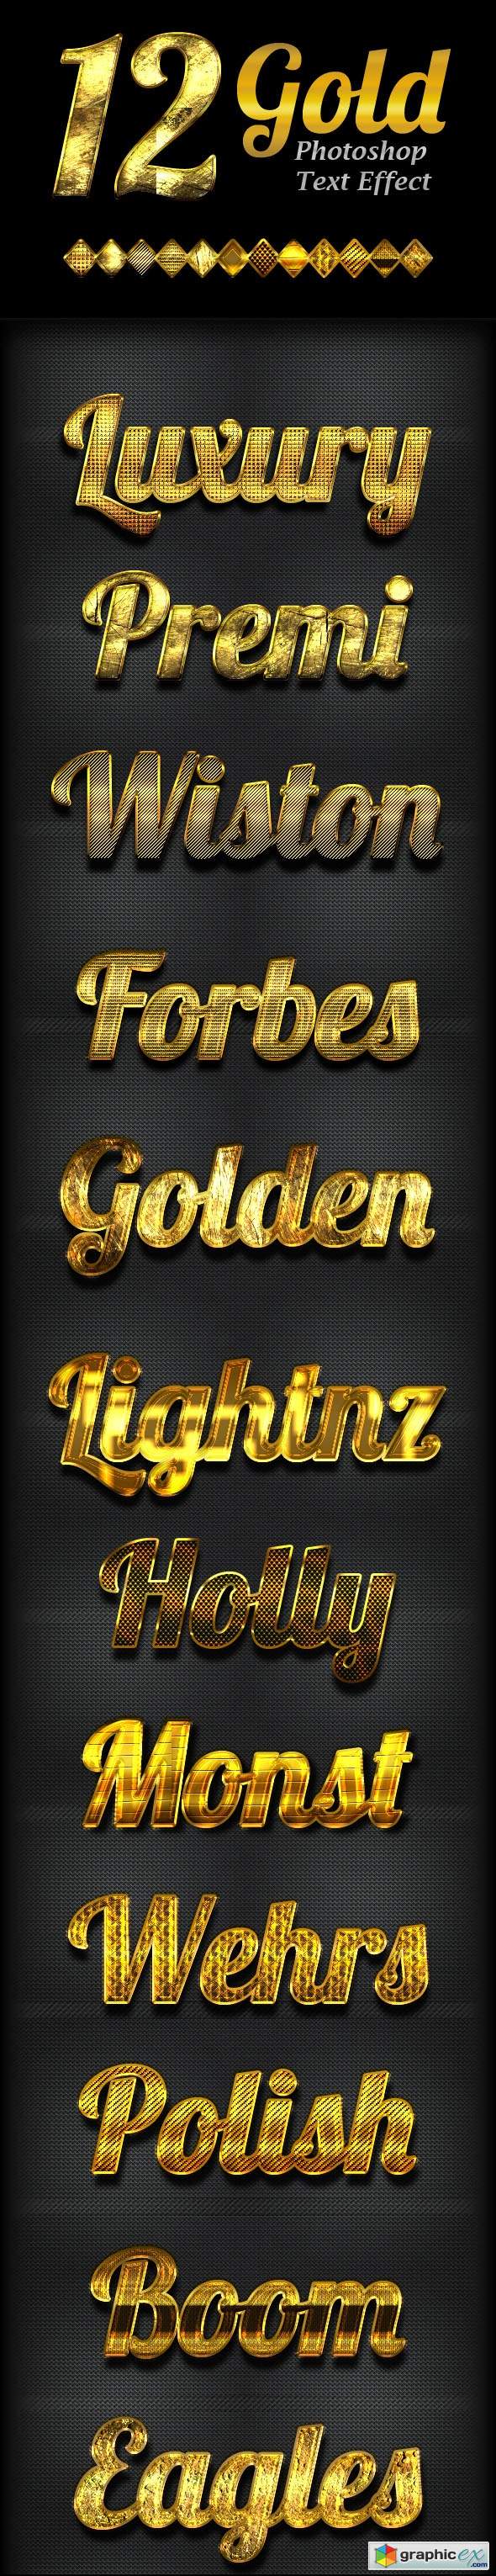 12 Gold Photoshop Text Effect Styles